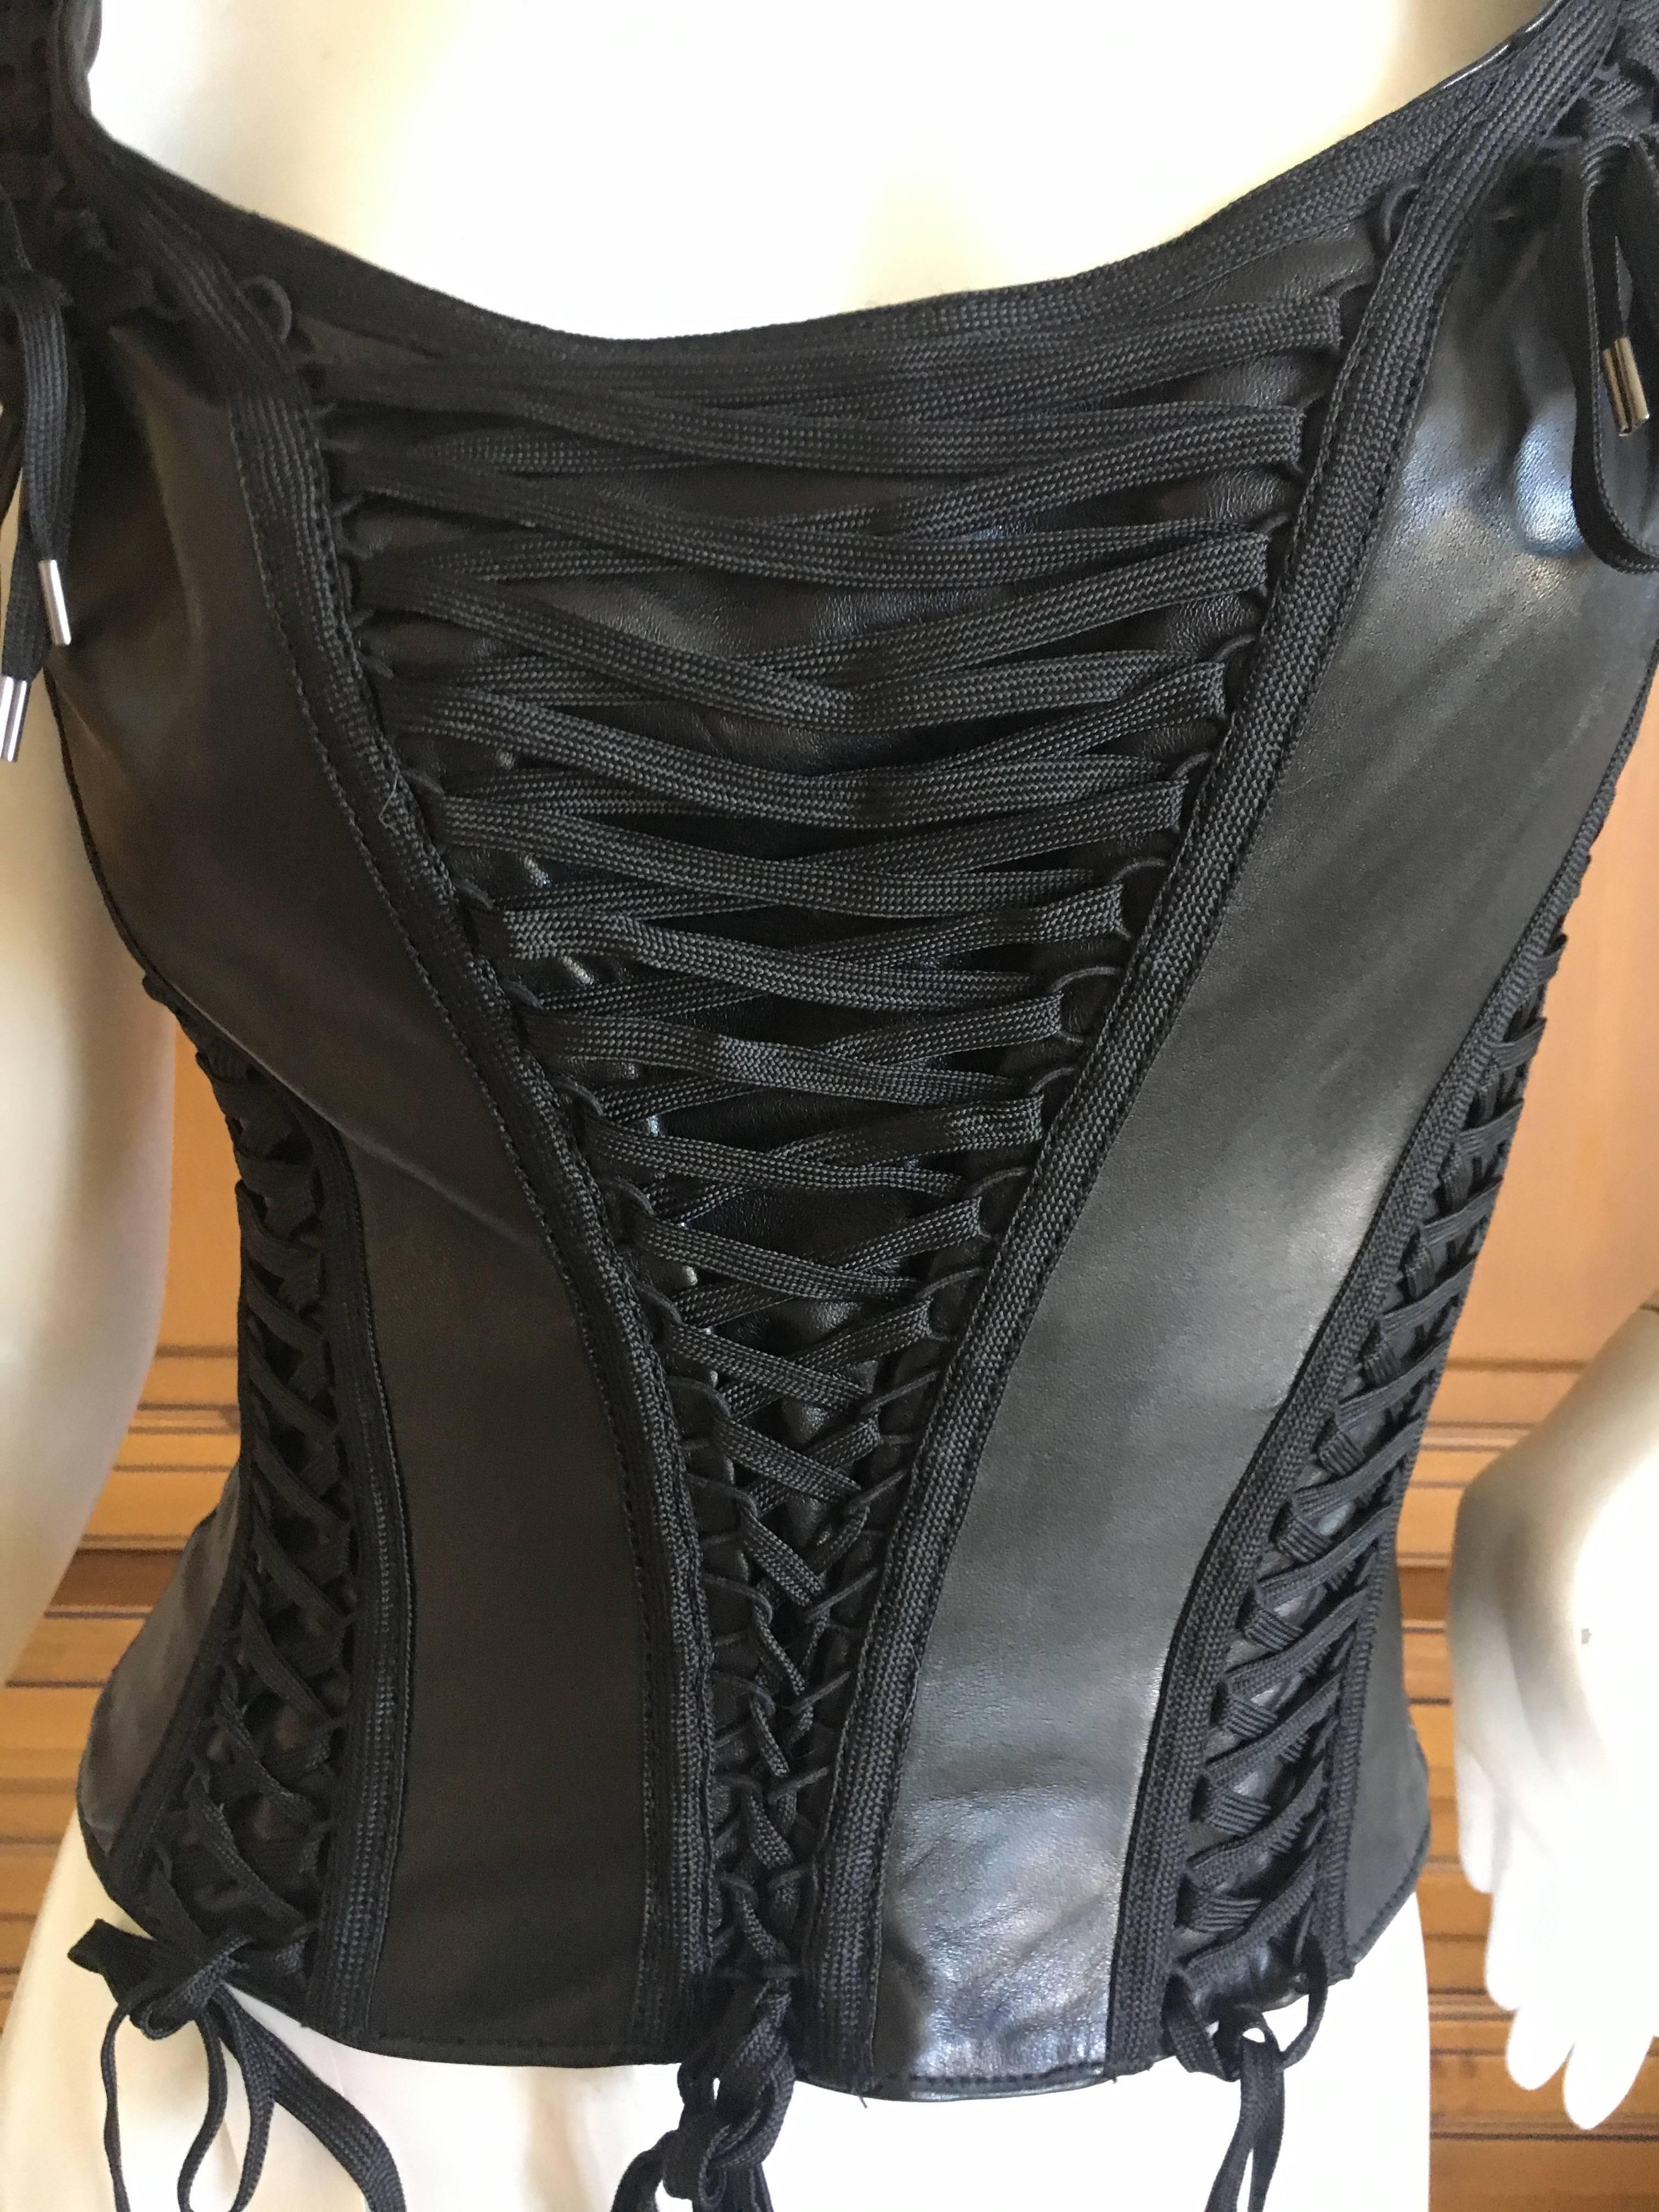 Christian Dior by John Galliano Black Leather Corset Lace Bondage Sleeveless  Top.
This is a sensational piece, so Galliano.
Marked size 40 , seems to run small
Bust 36